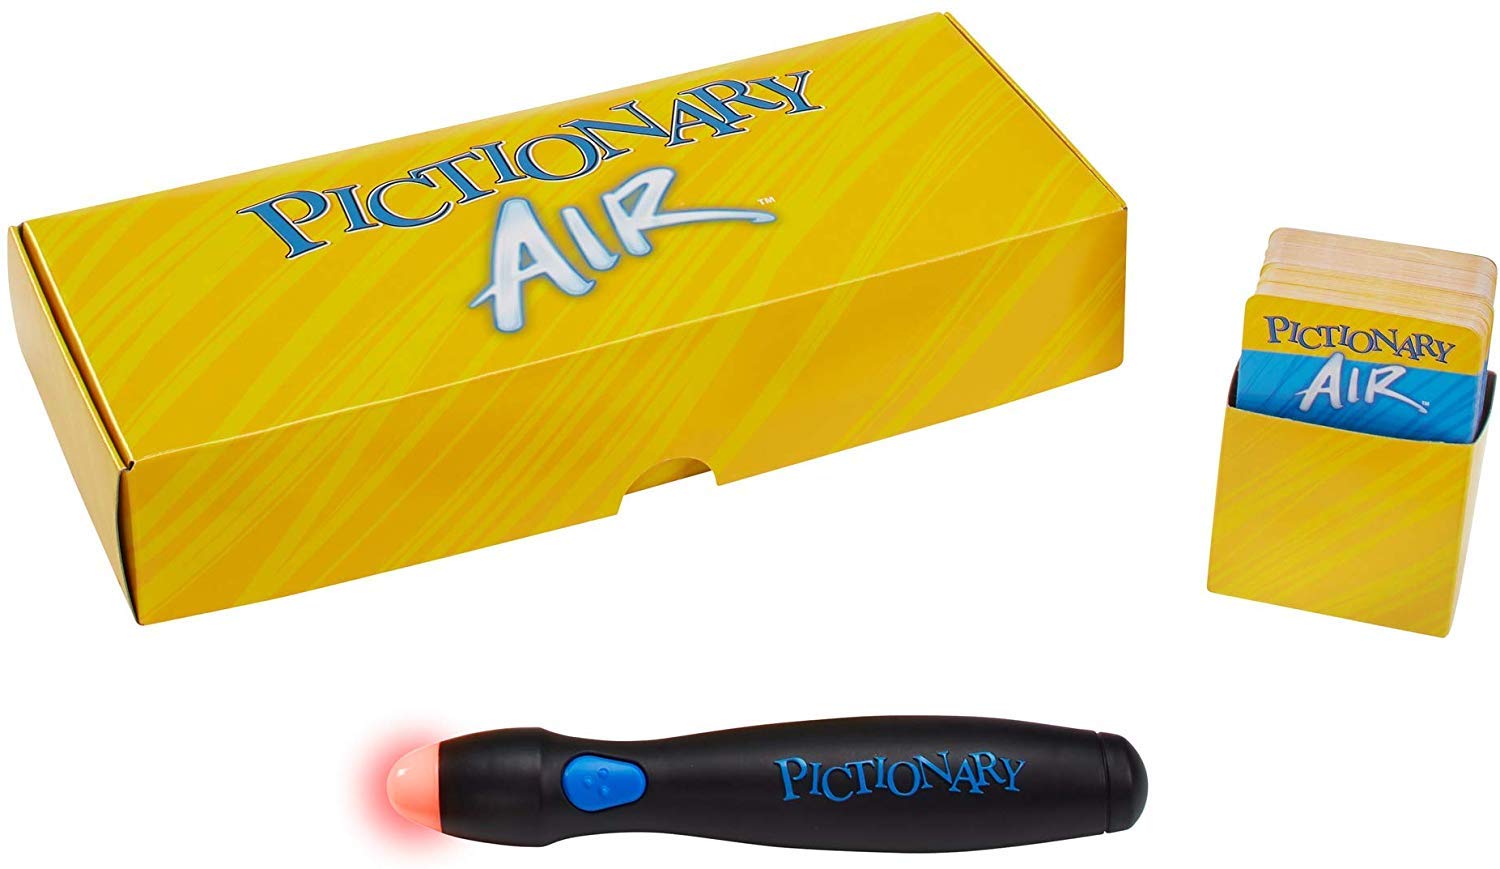 Pictionary Air Family Game for Kids & Adults with Light Pen and Clue Cards, Connect to Smart Devices (Amazon Exclusive)